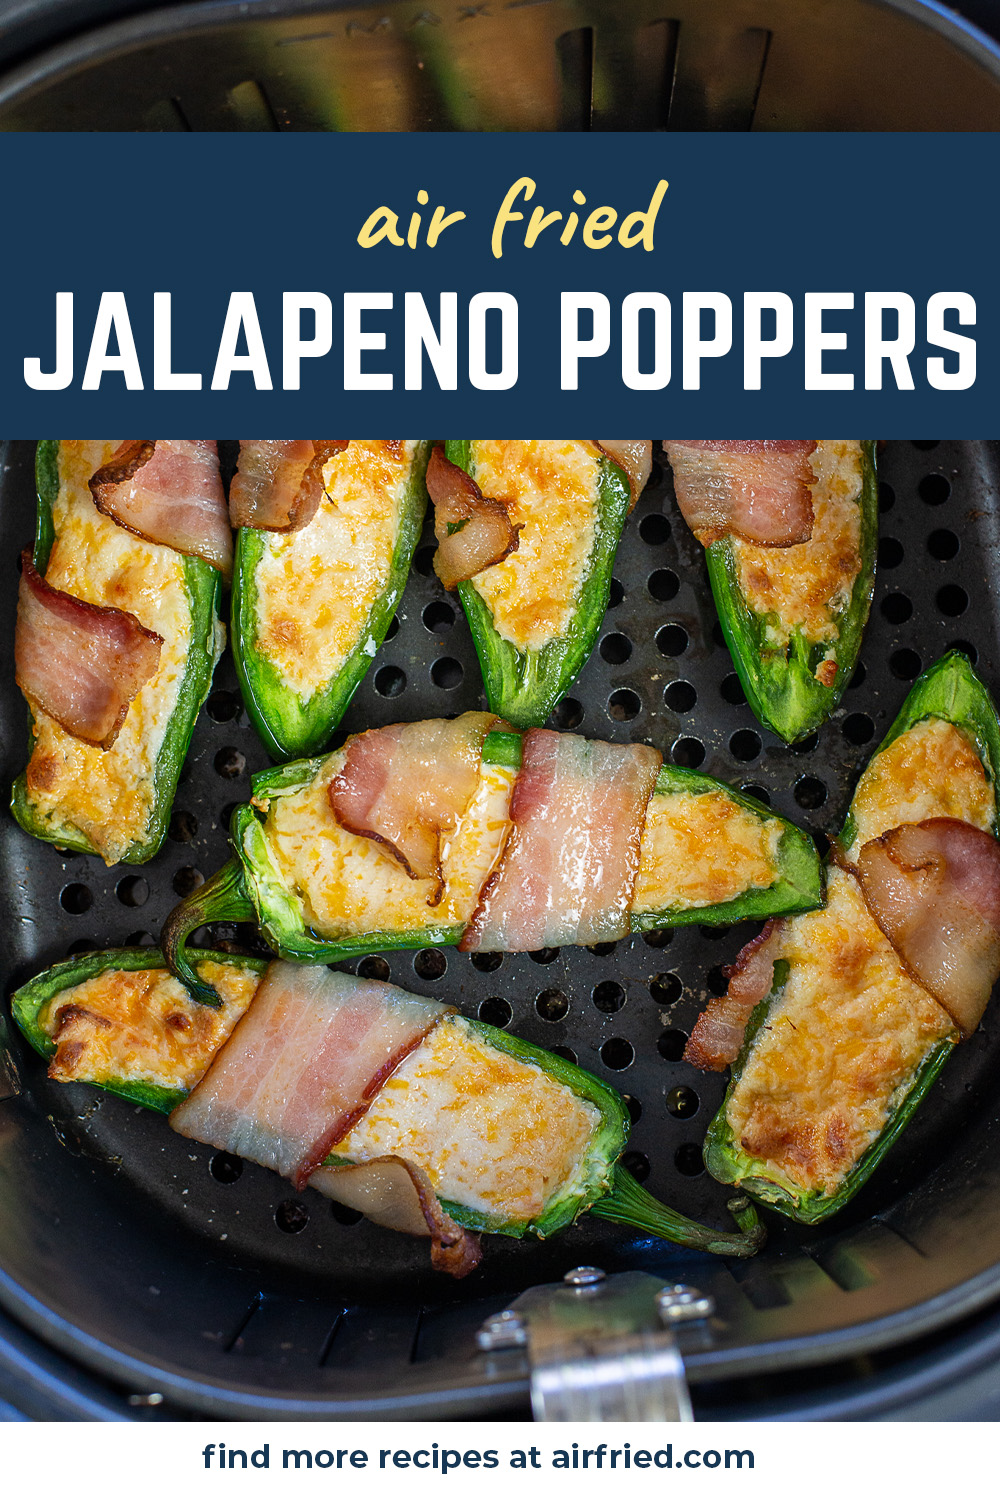 These air fryer poppers are wonderfully sweet, salty, and spicy!